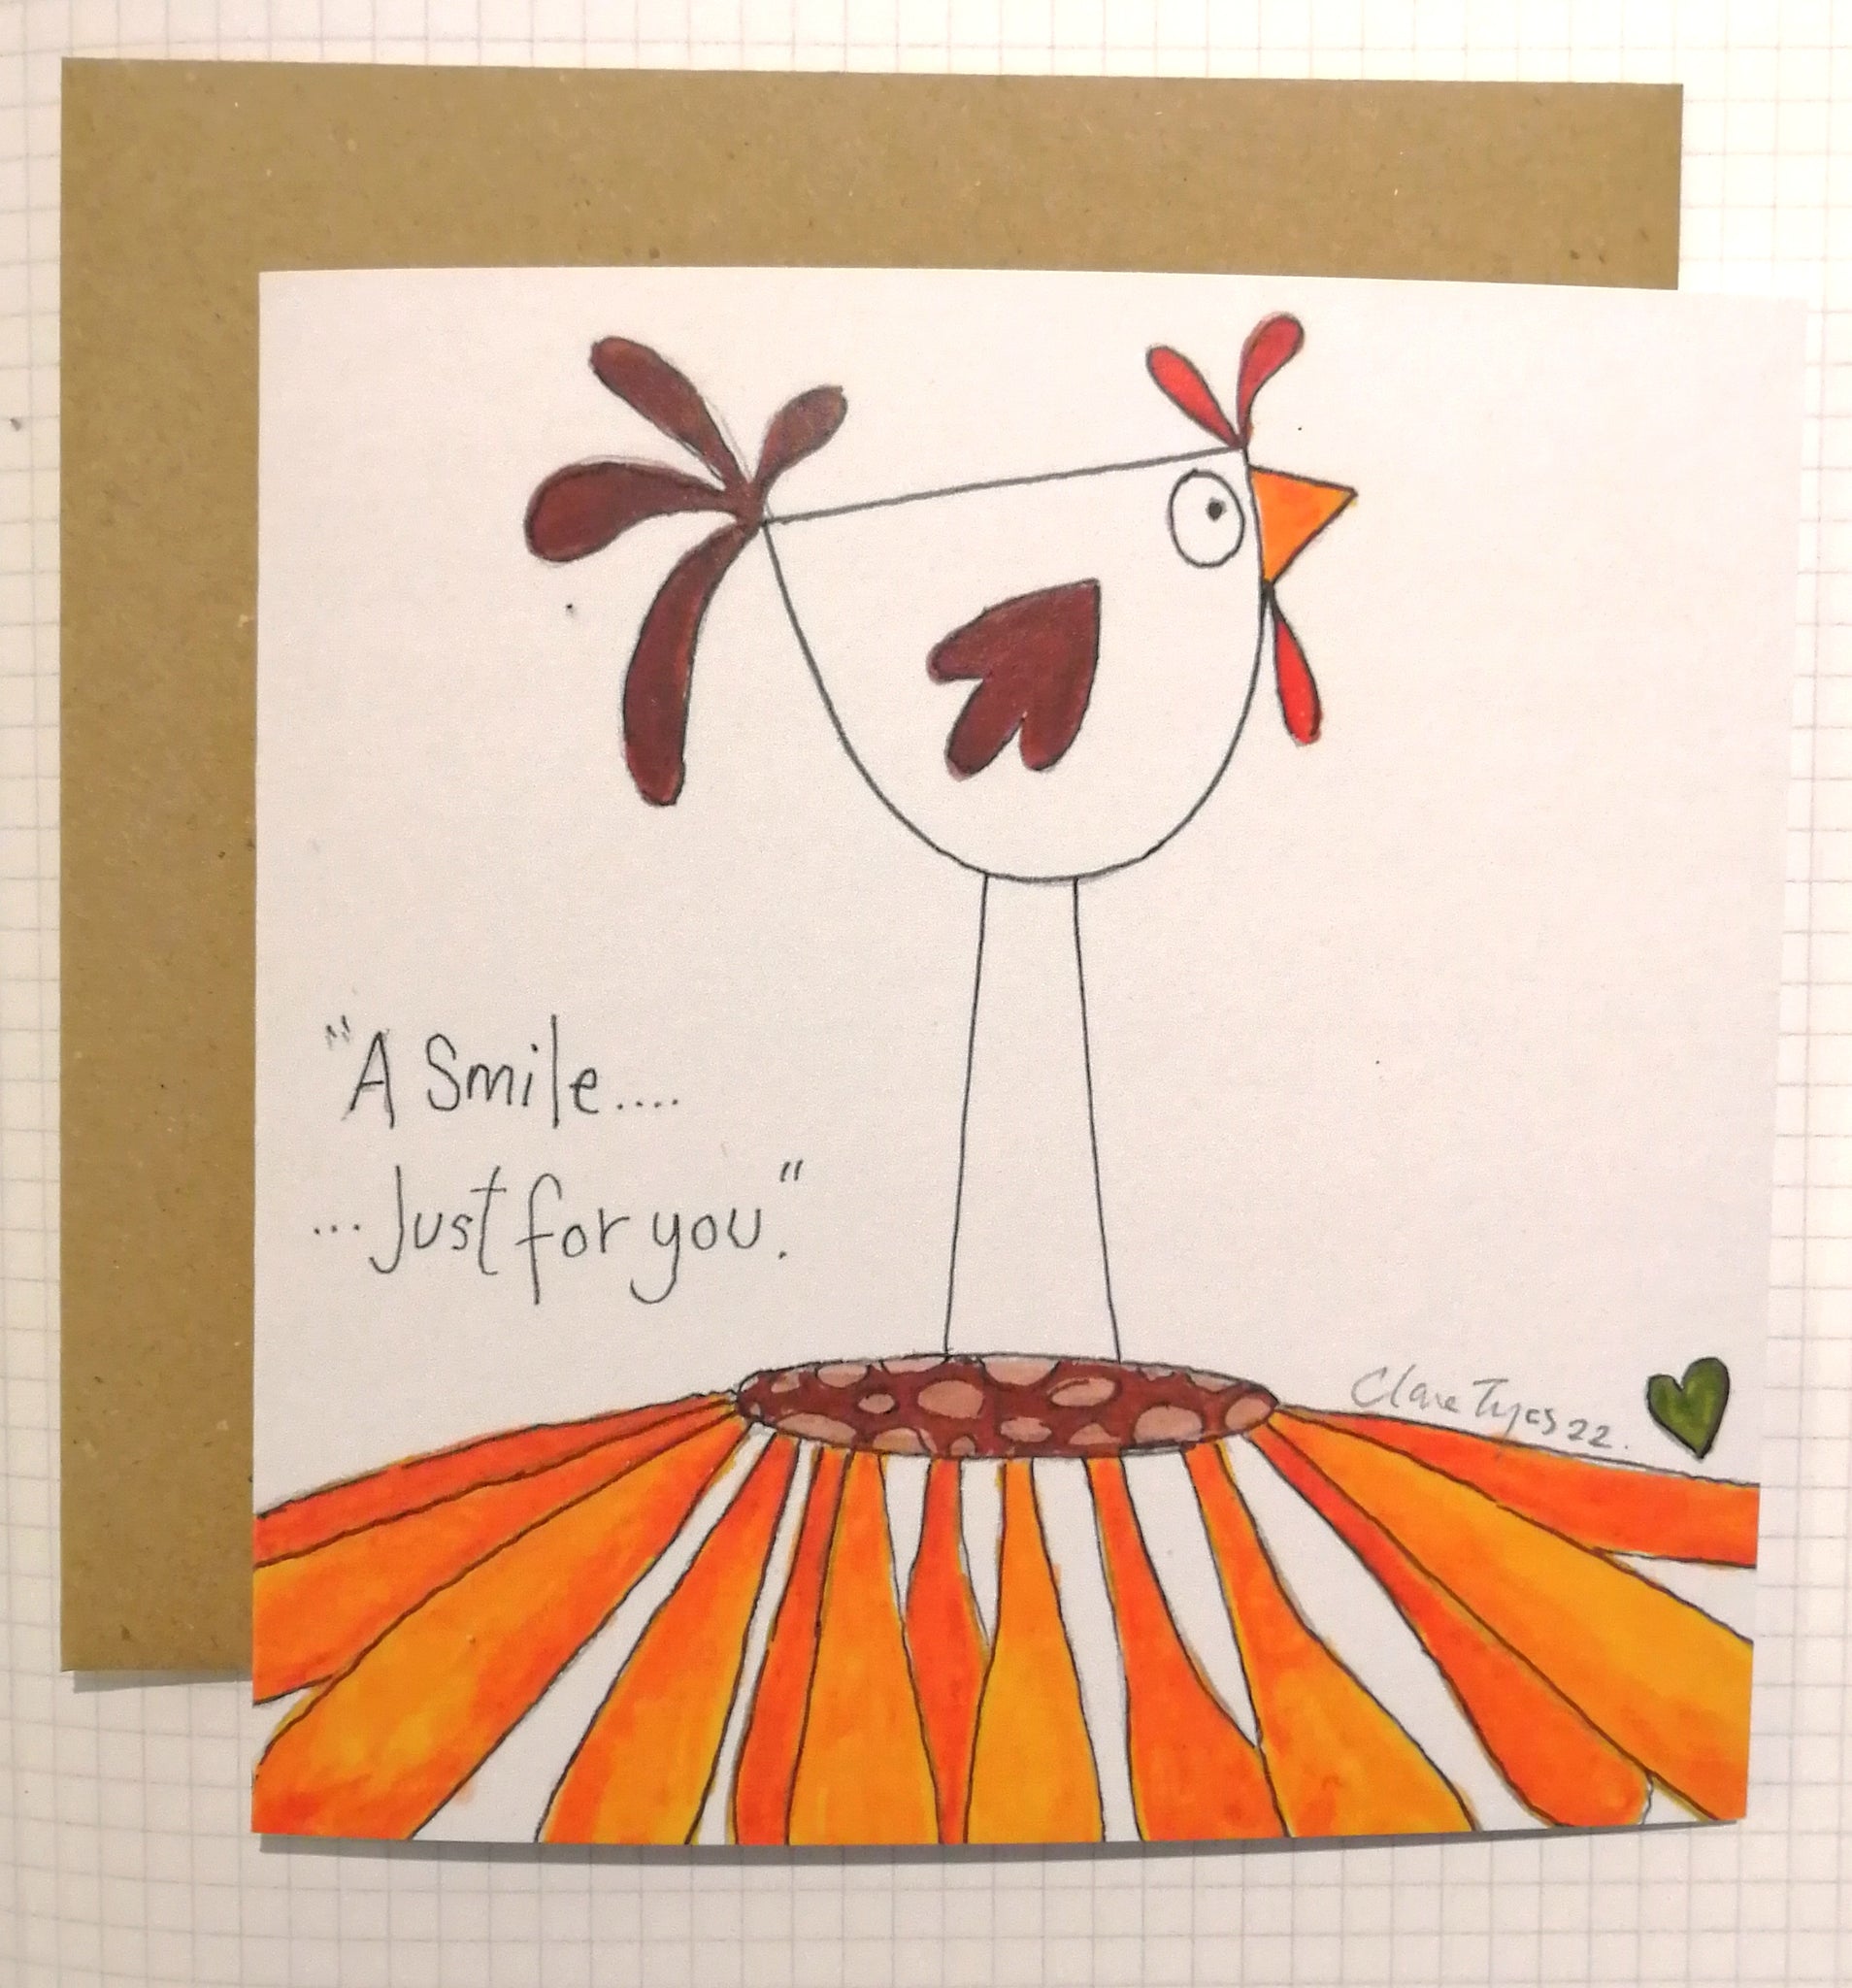 A smile just for you. Greetings card.